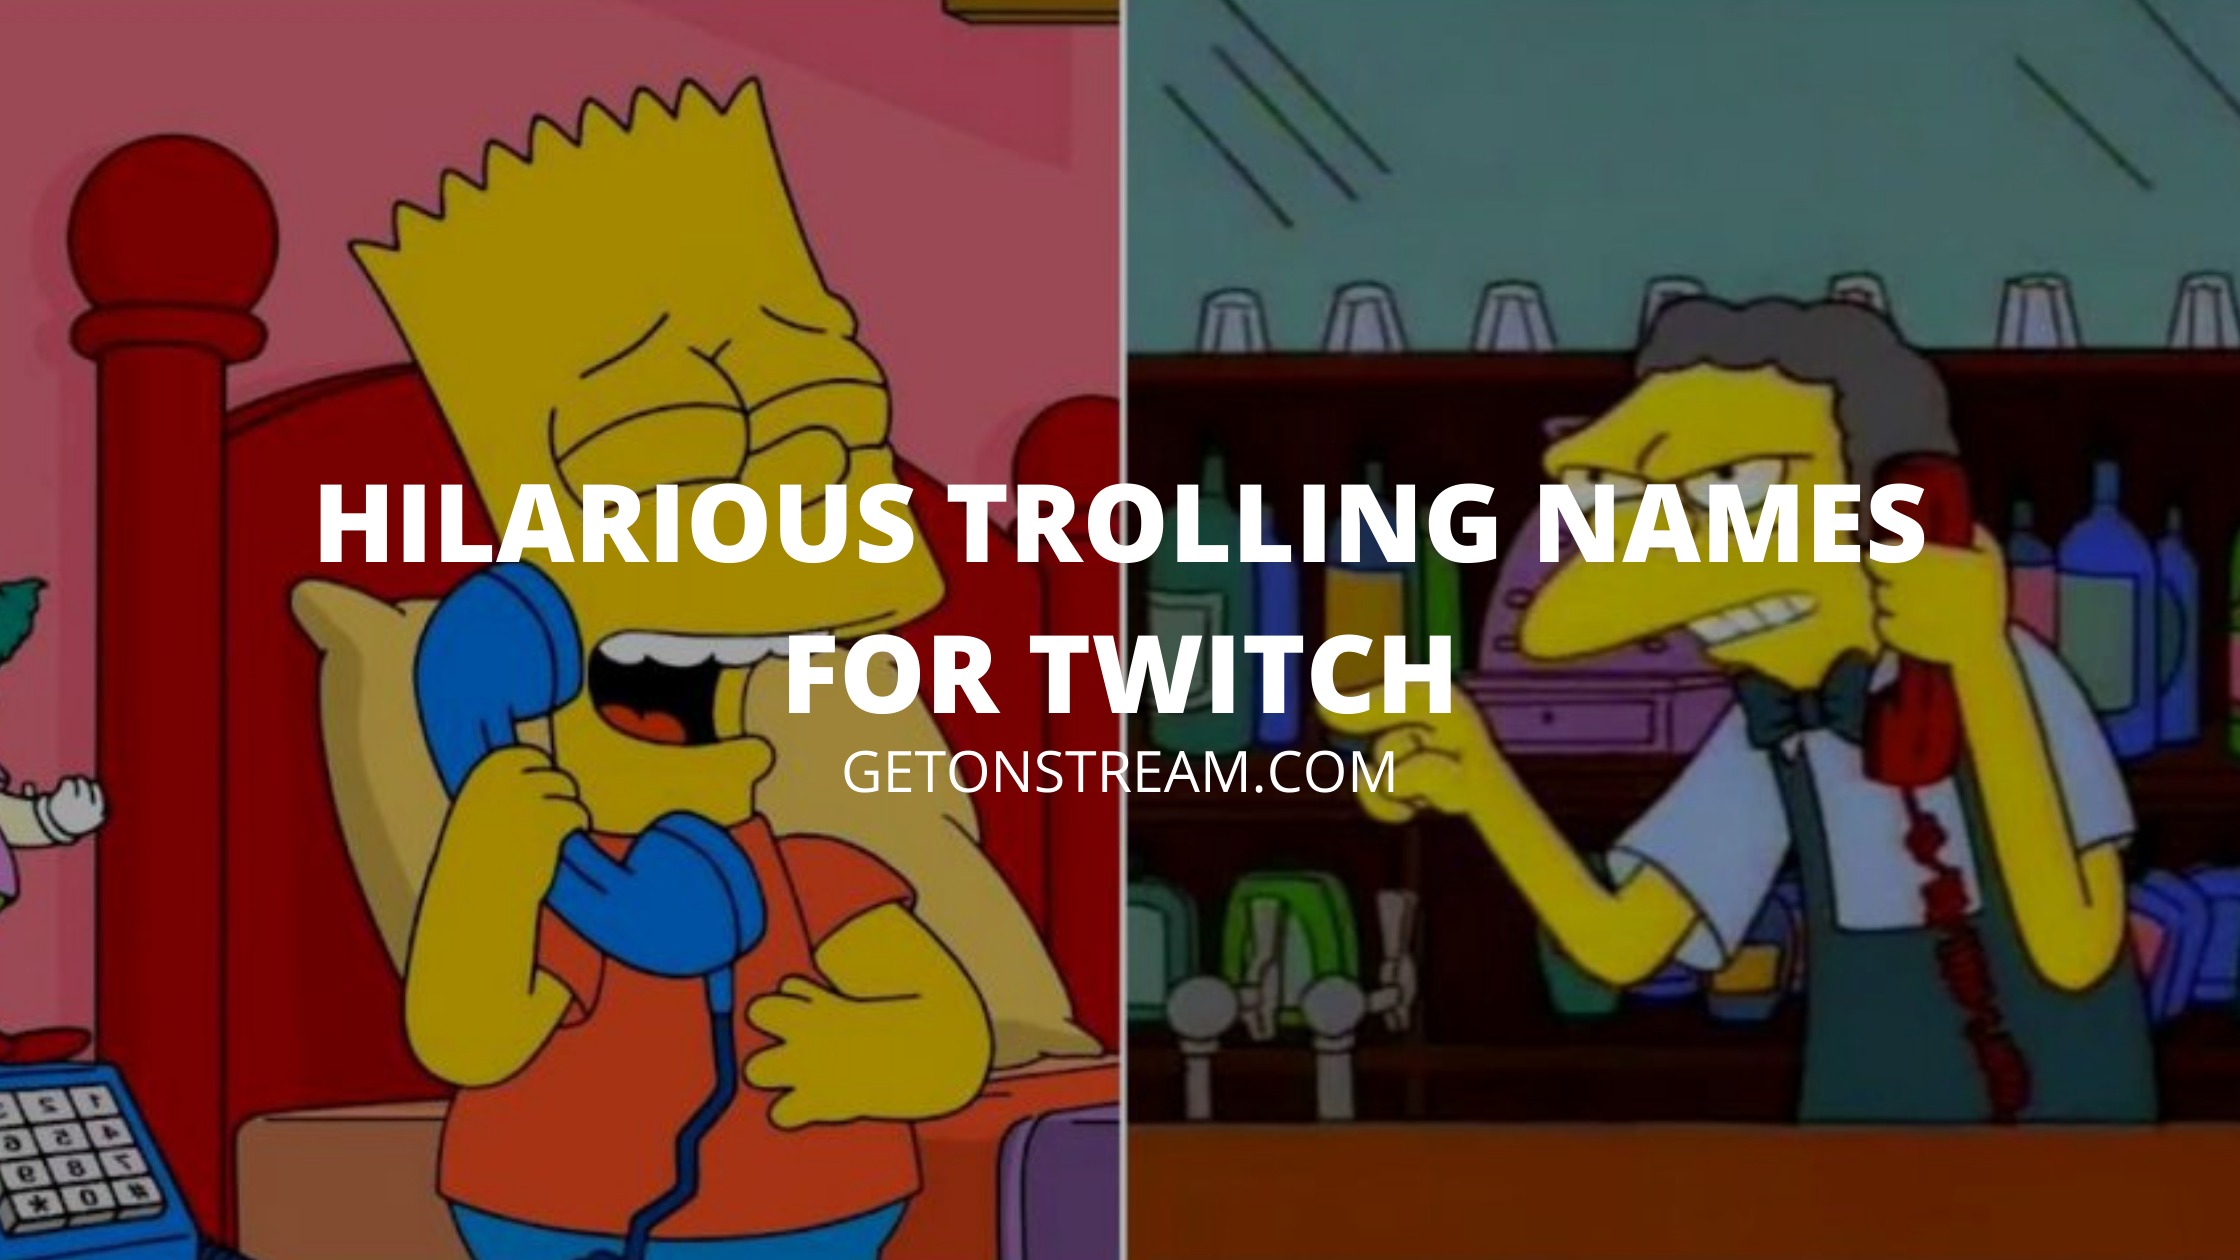 35 Hilarious Trolling Names For Twitch - Get On Stream